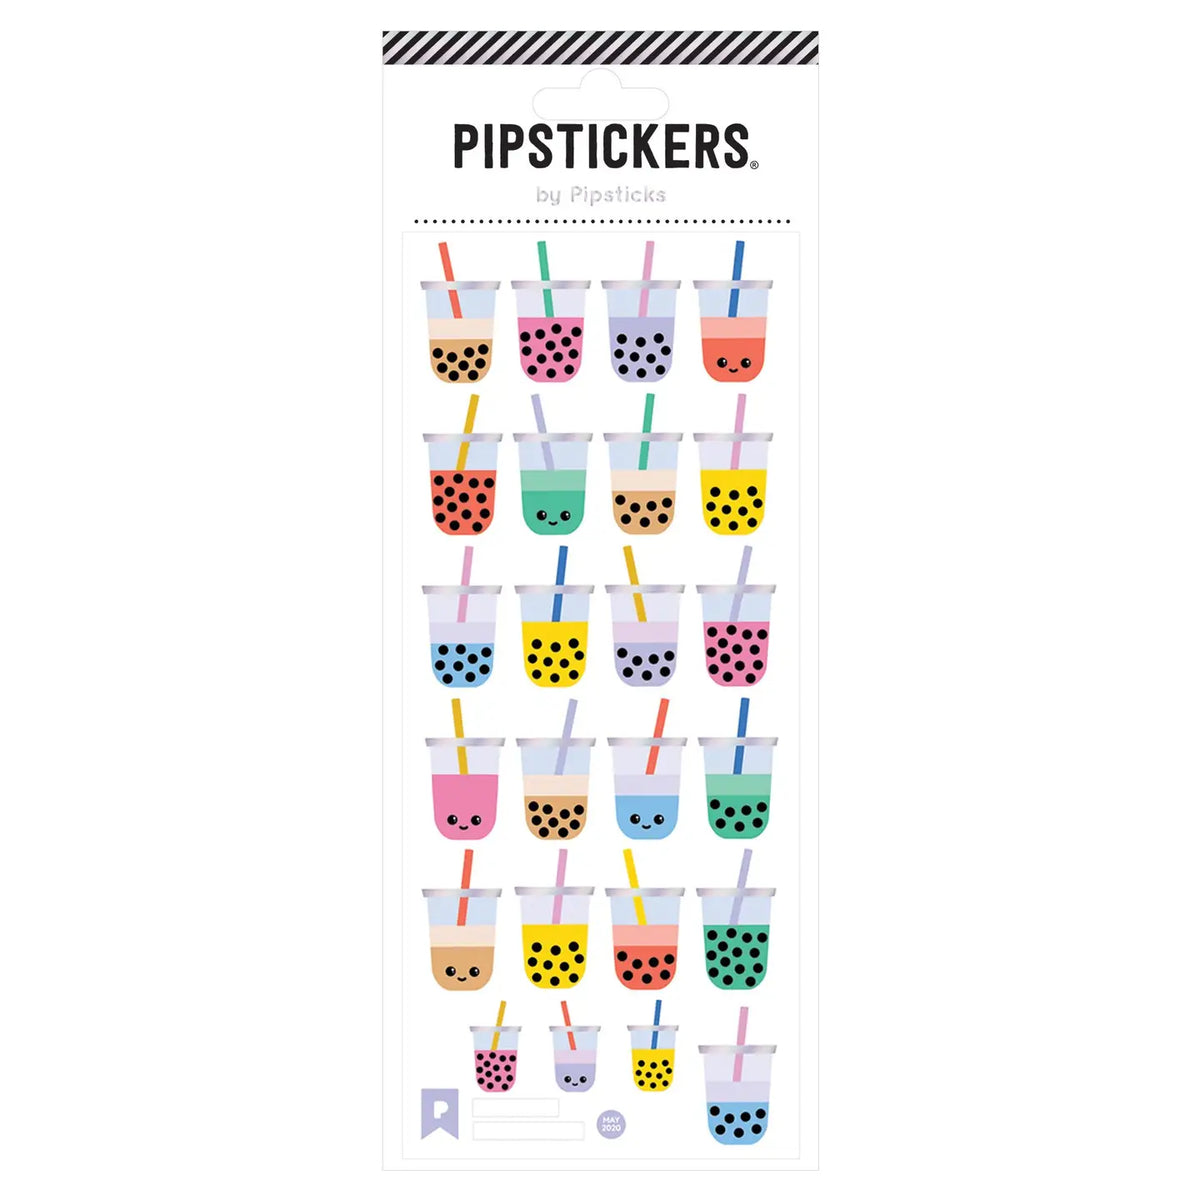 Pipstickers $5.99 Cover